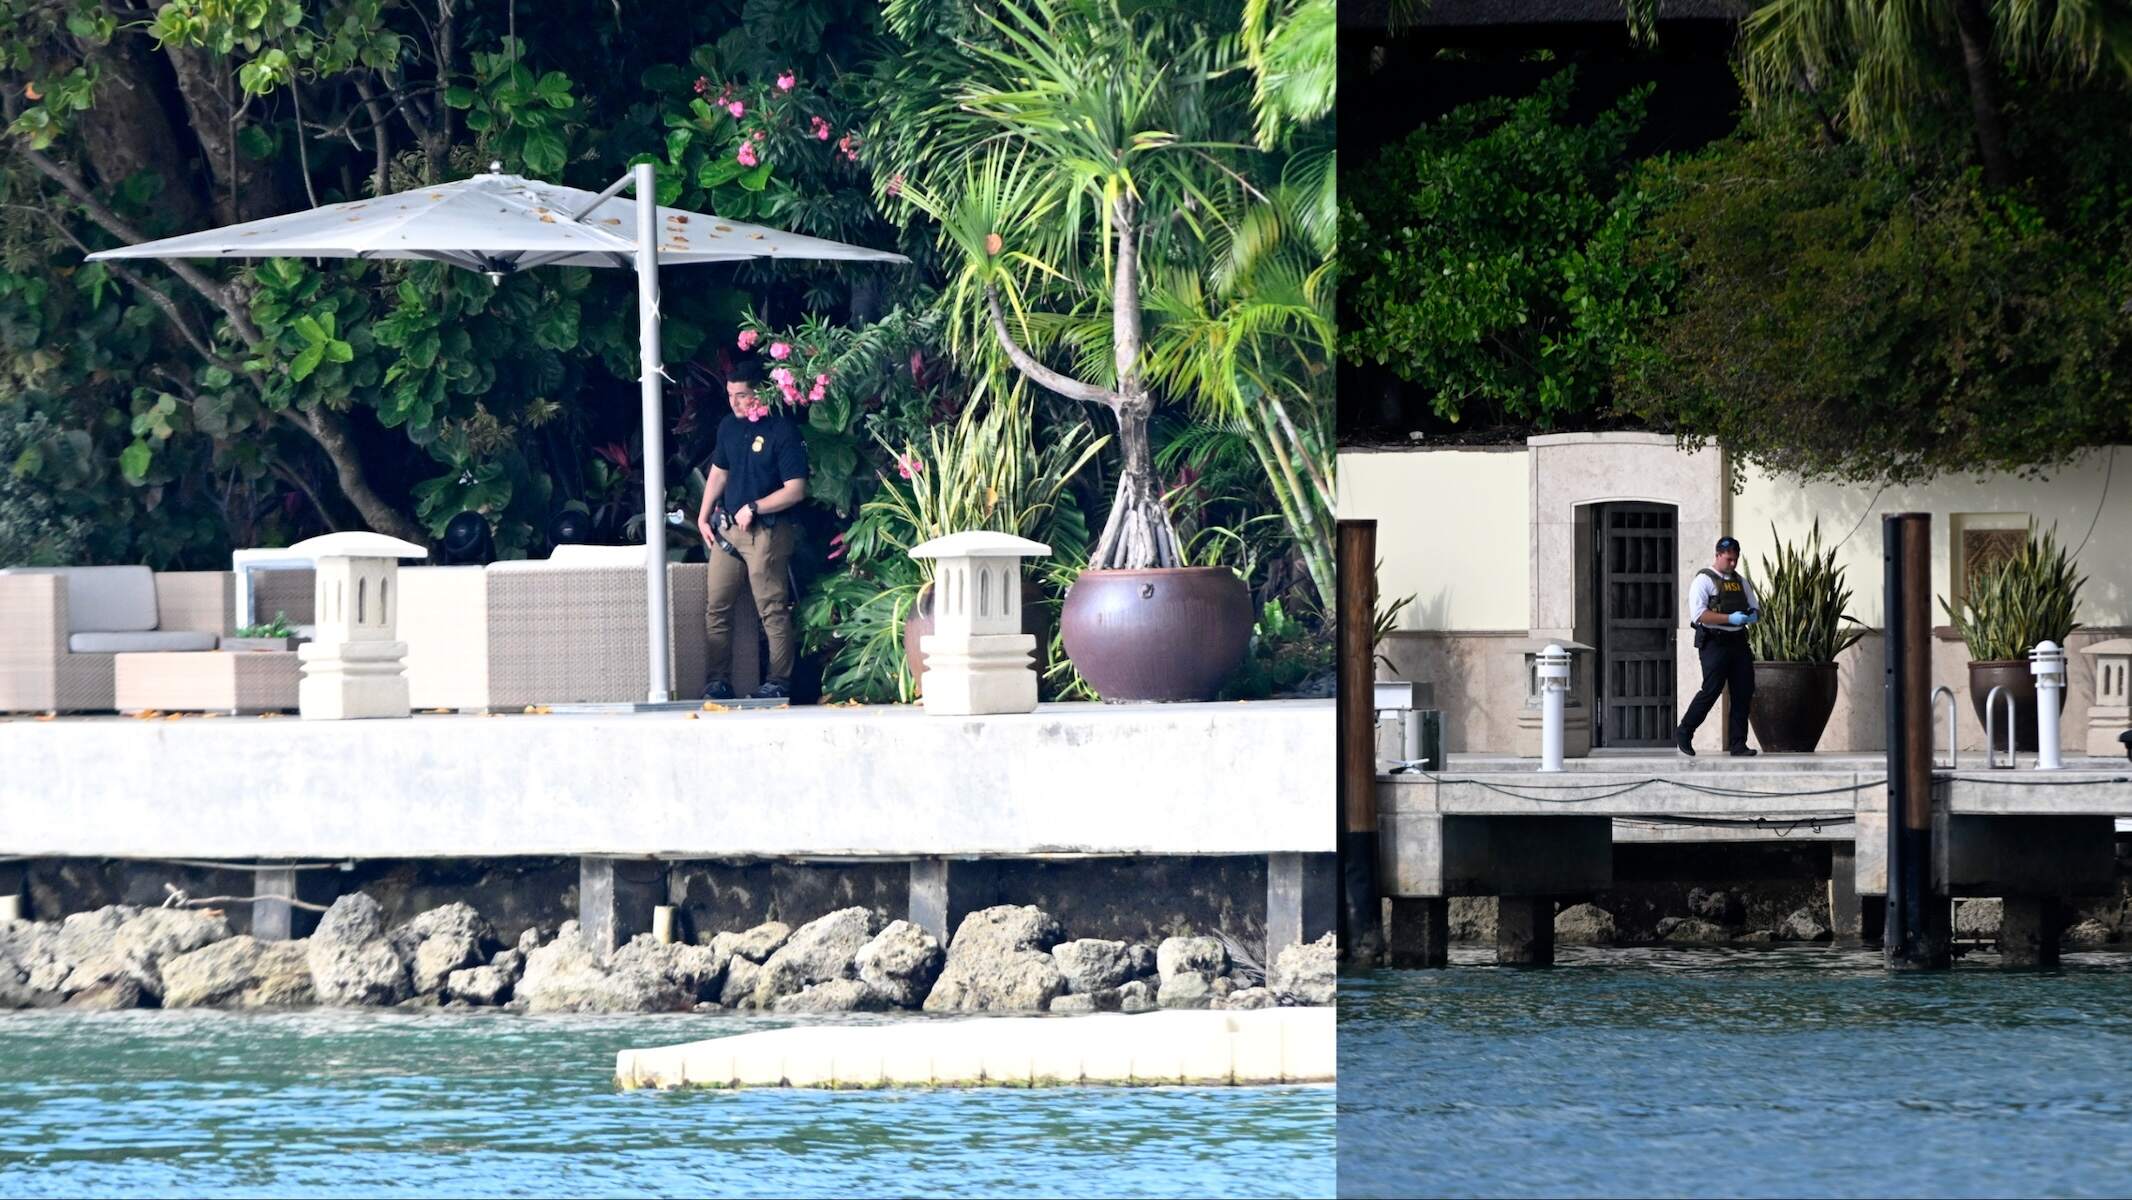 Homeland Security officers are seen at the waterfront mansion of Sean Combs